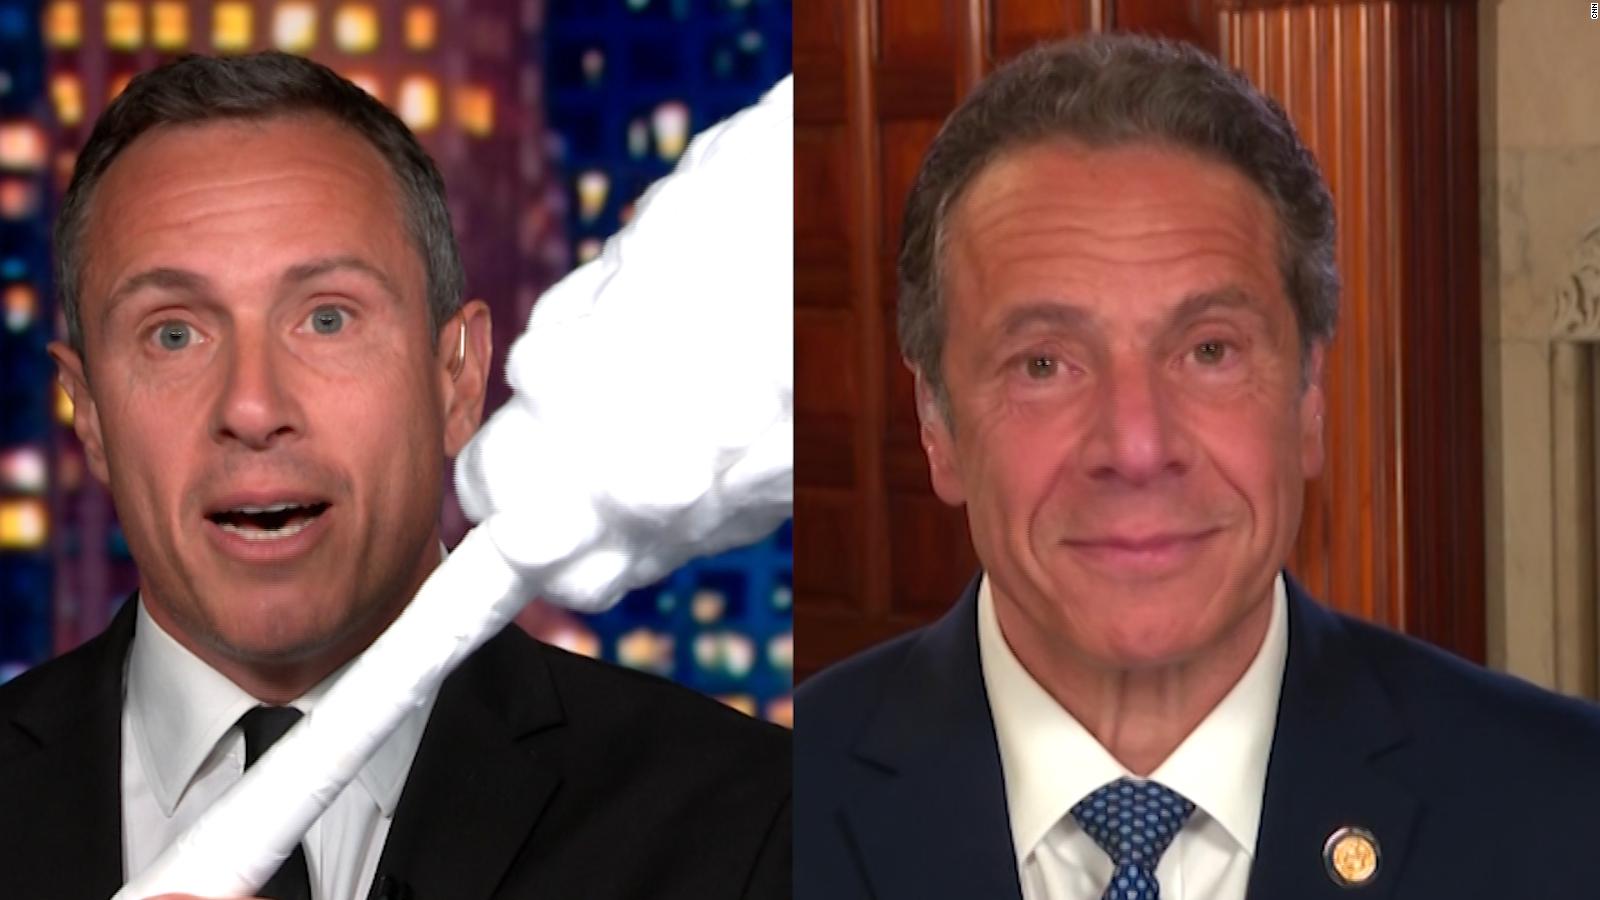 Chris Cuomo Teases Brother Andrew Cuomo With Giant Test Swab Cnn Video